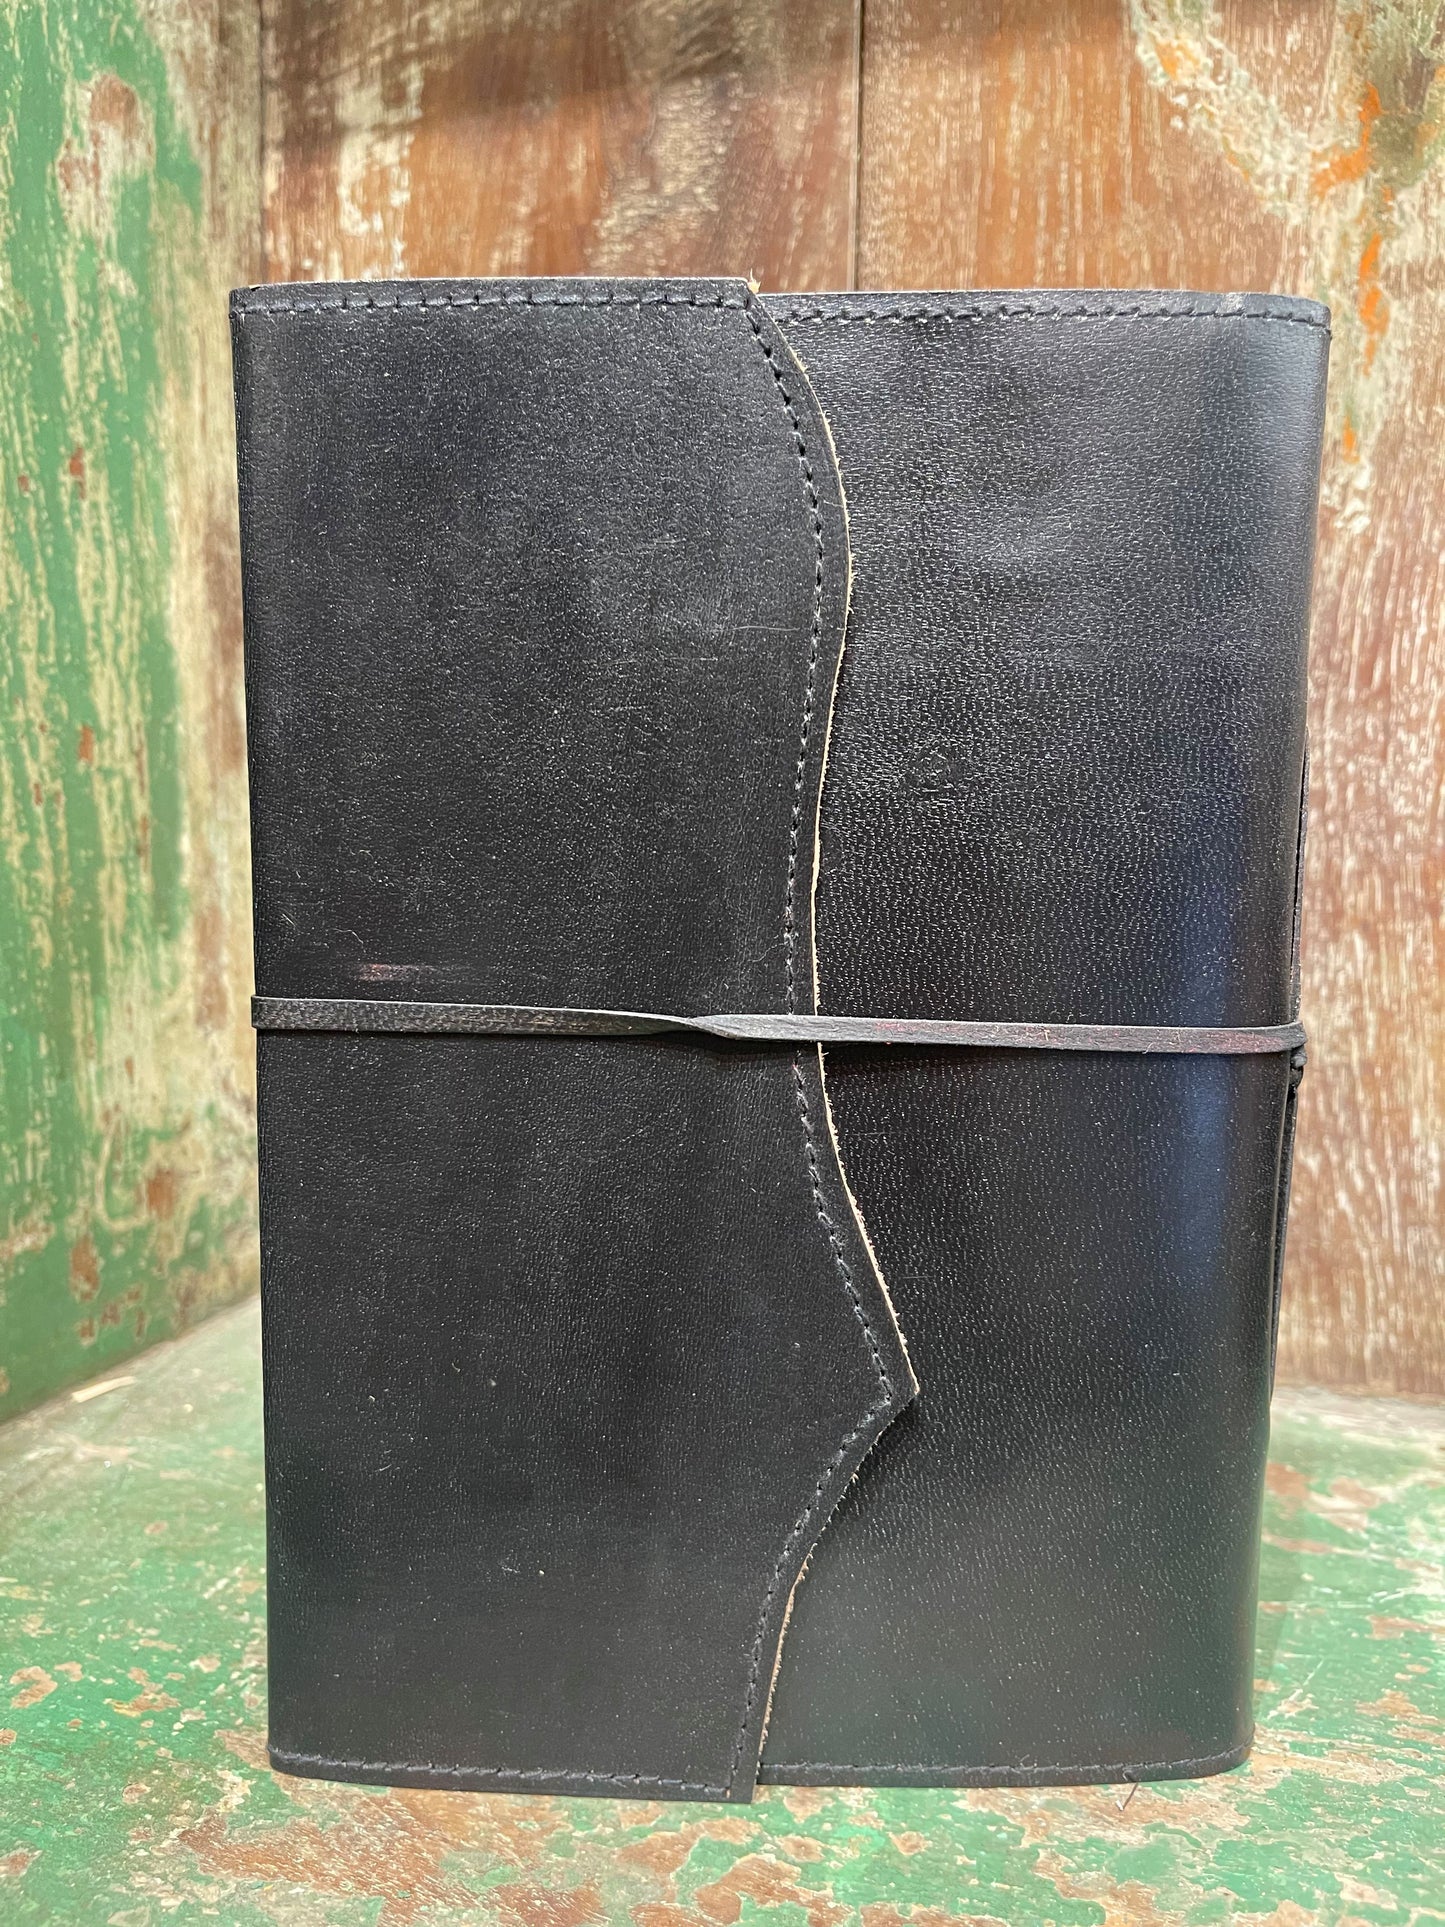 Leather flap journal 8 3/8" x 6 1/8"